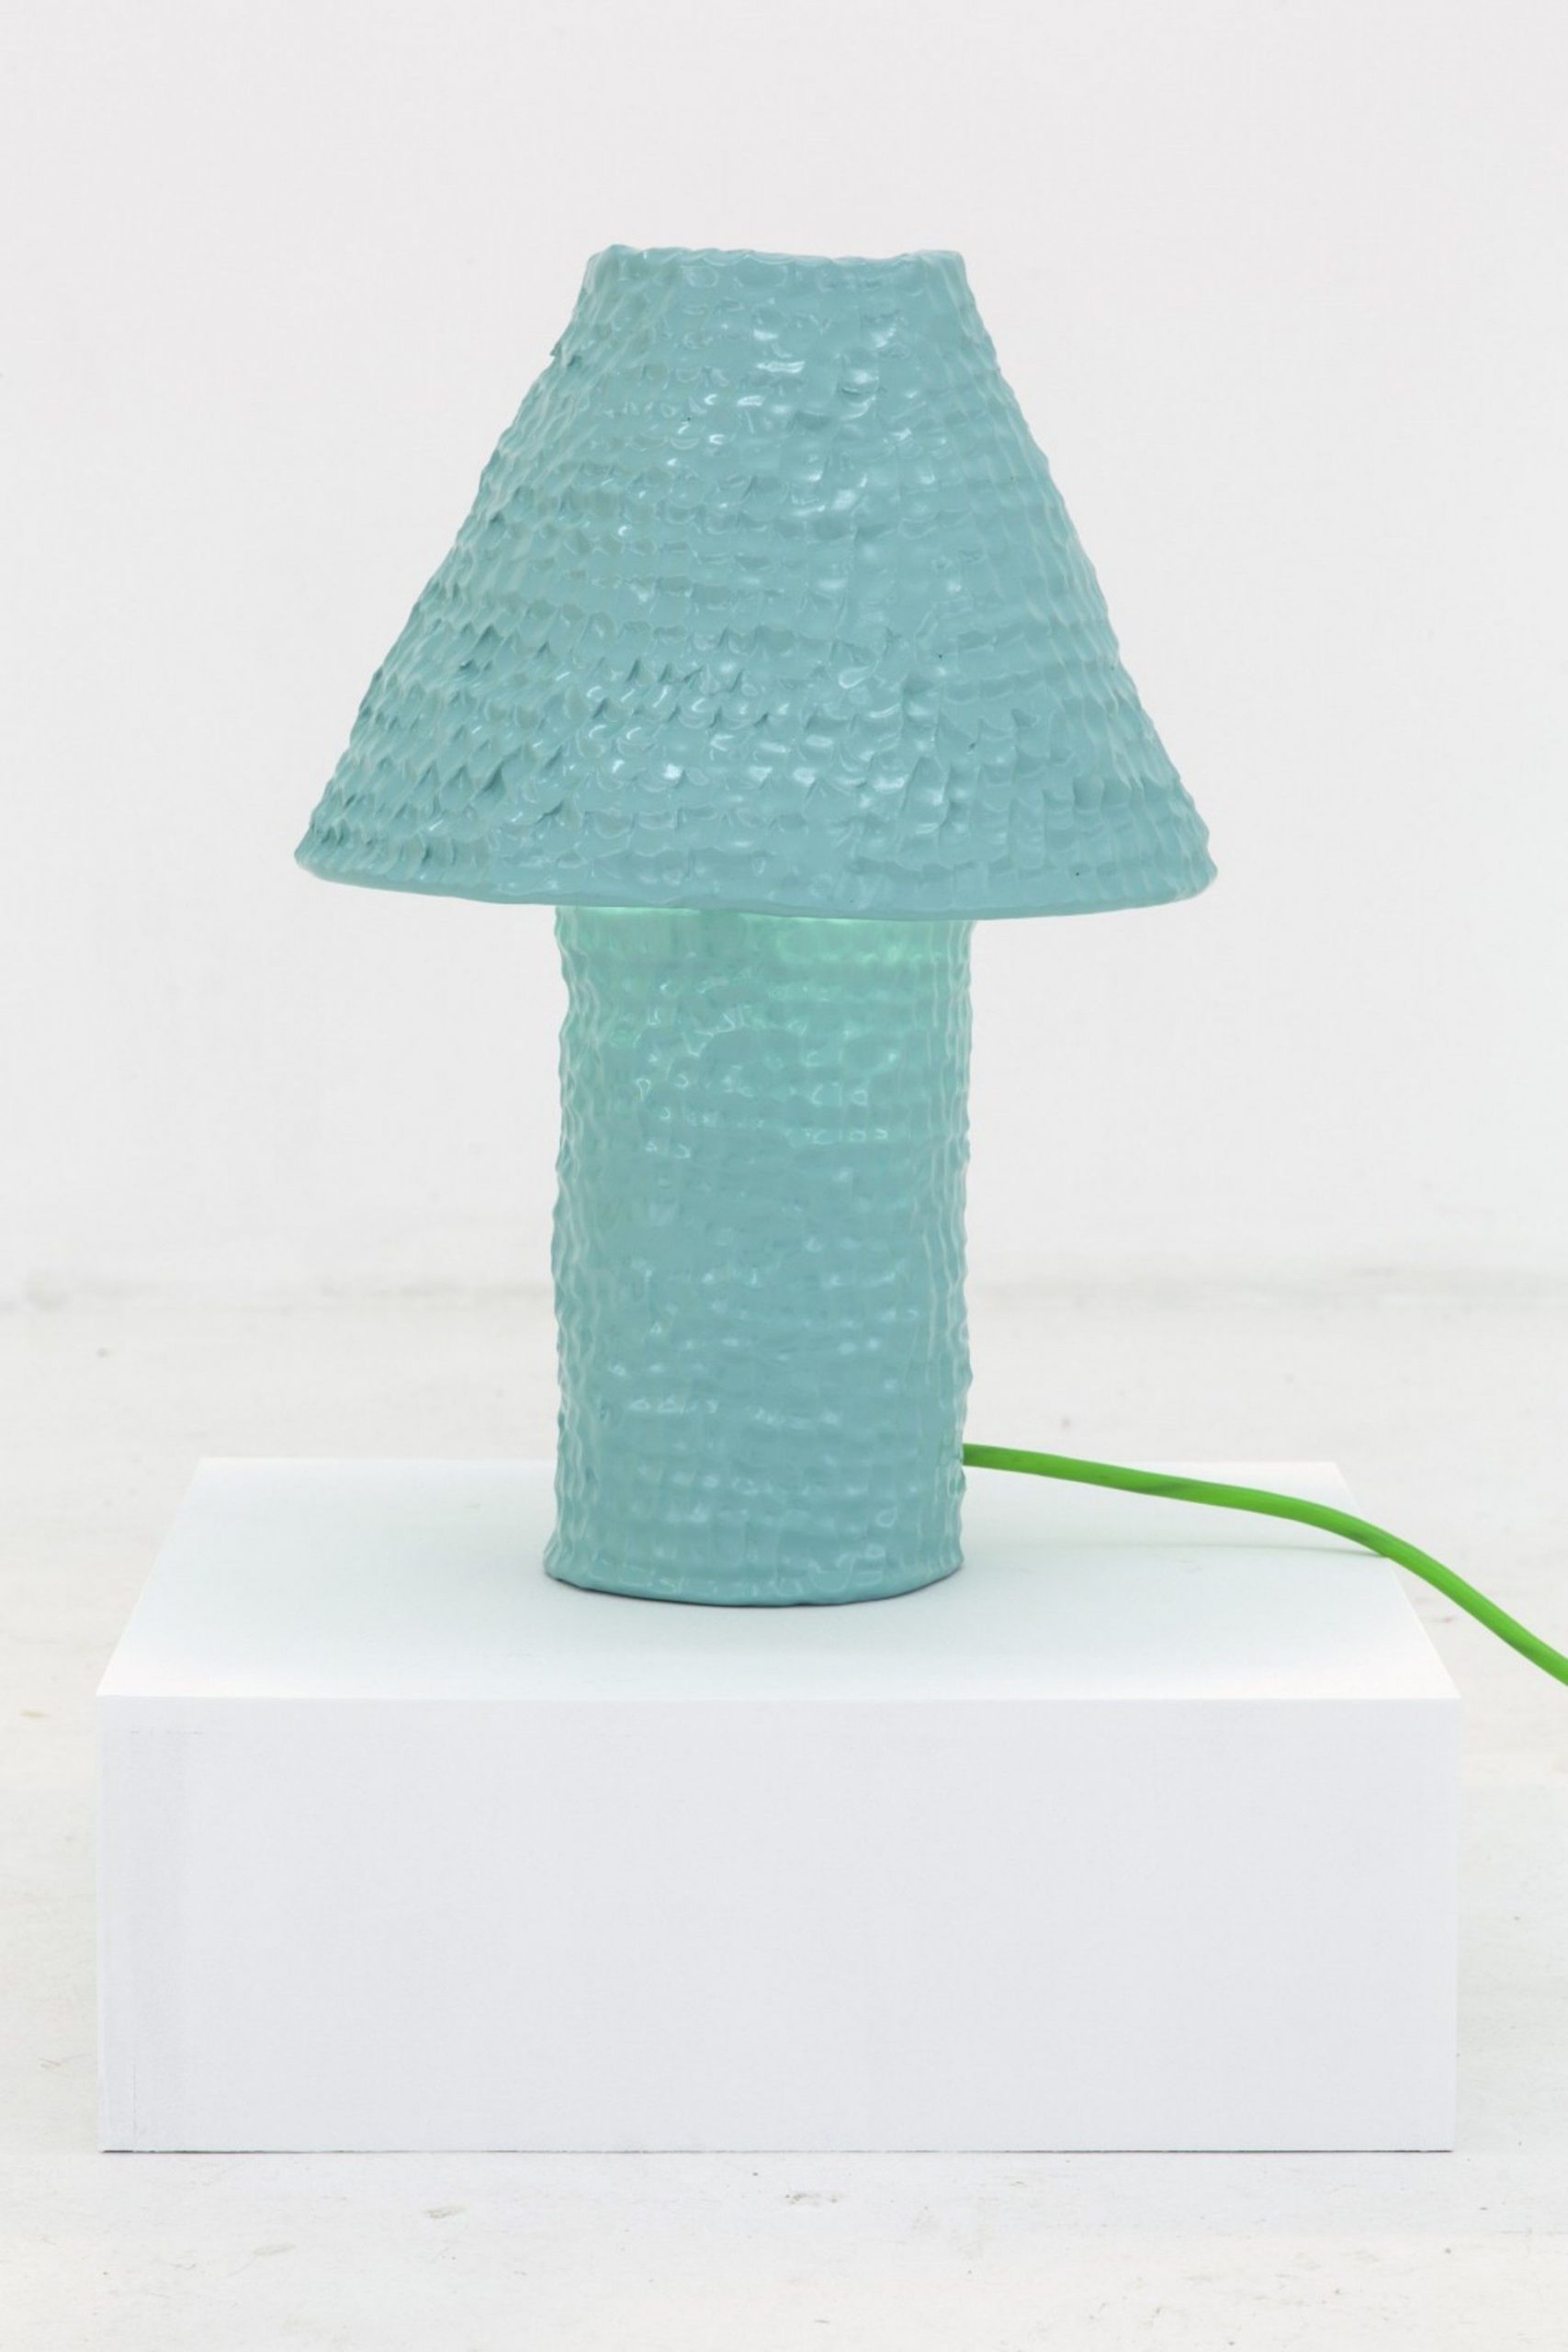 Blue Table Lamp with Shade by Katie Stout for exhibition Docile/Domicile/Dandy at Gallery Diet, Miami 2015